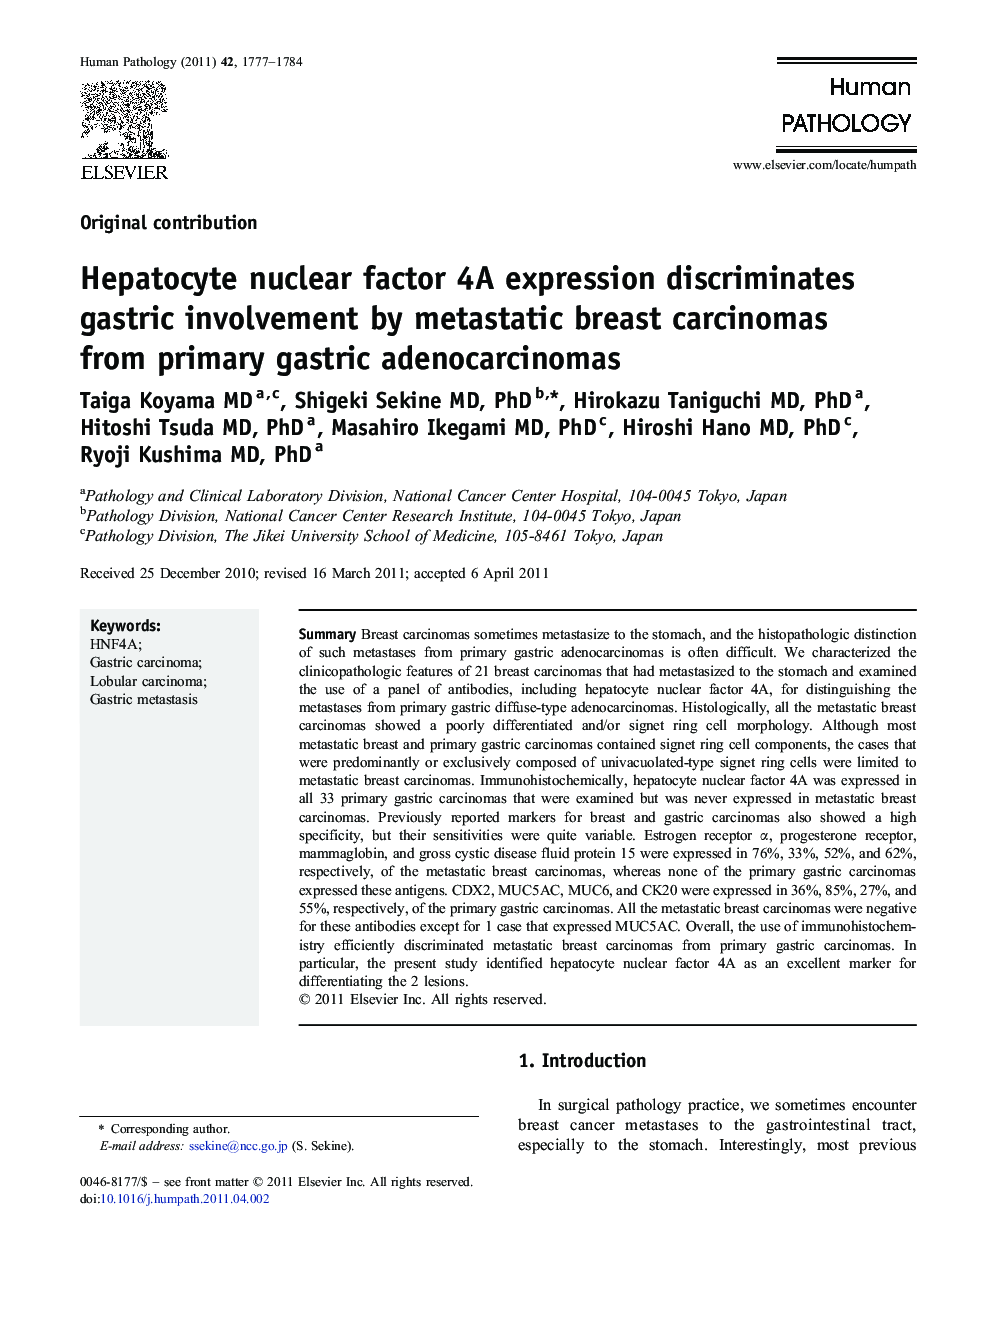 Hepatocyte nuclear factor 4A expression discriminates gastric involvement by metastatic breast carcinomas from primary gastric adenocarcinomas